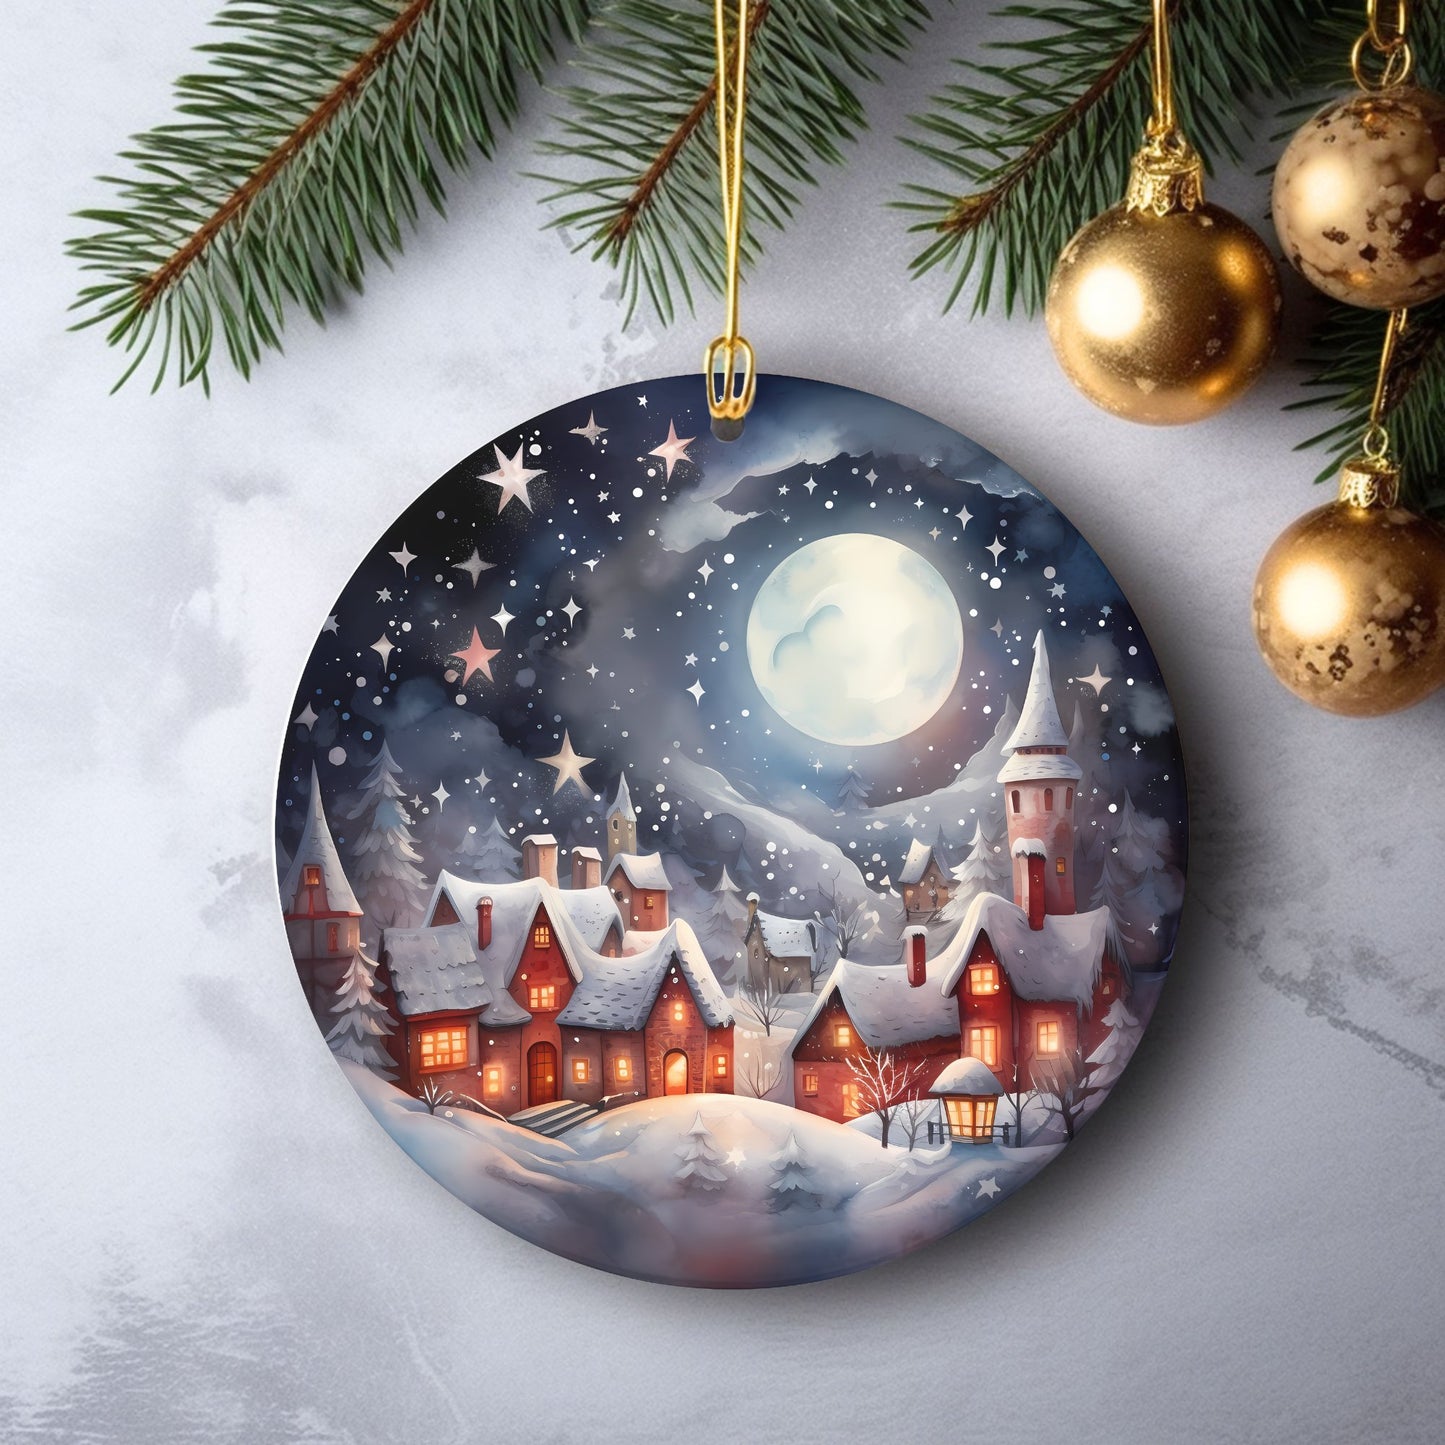 Watercolor Christmas Ornaments featuring 20 different designs Round Ceramic Ornaments with Vivid Classic Xmas Designs Festive Christmas Tree Decoration